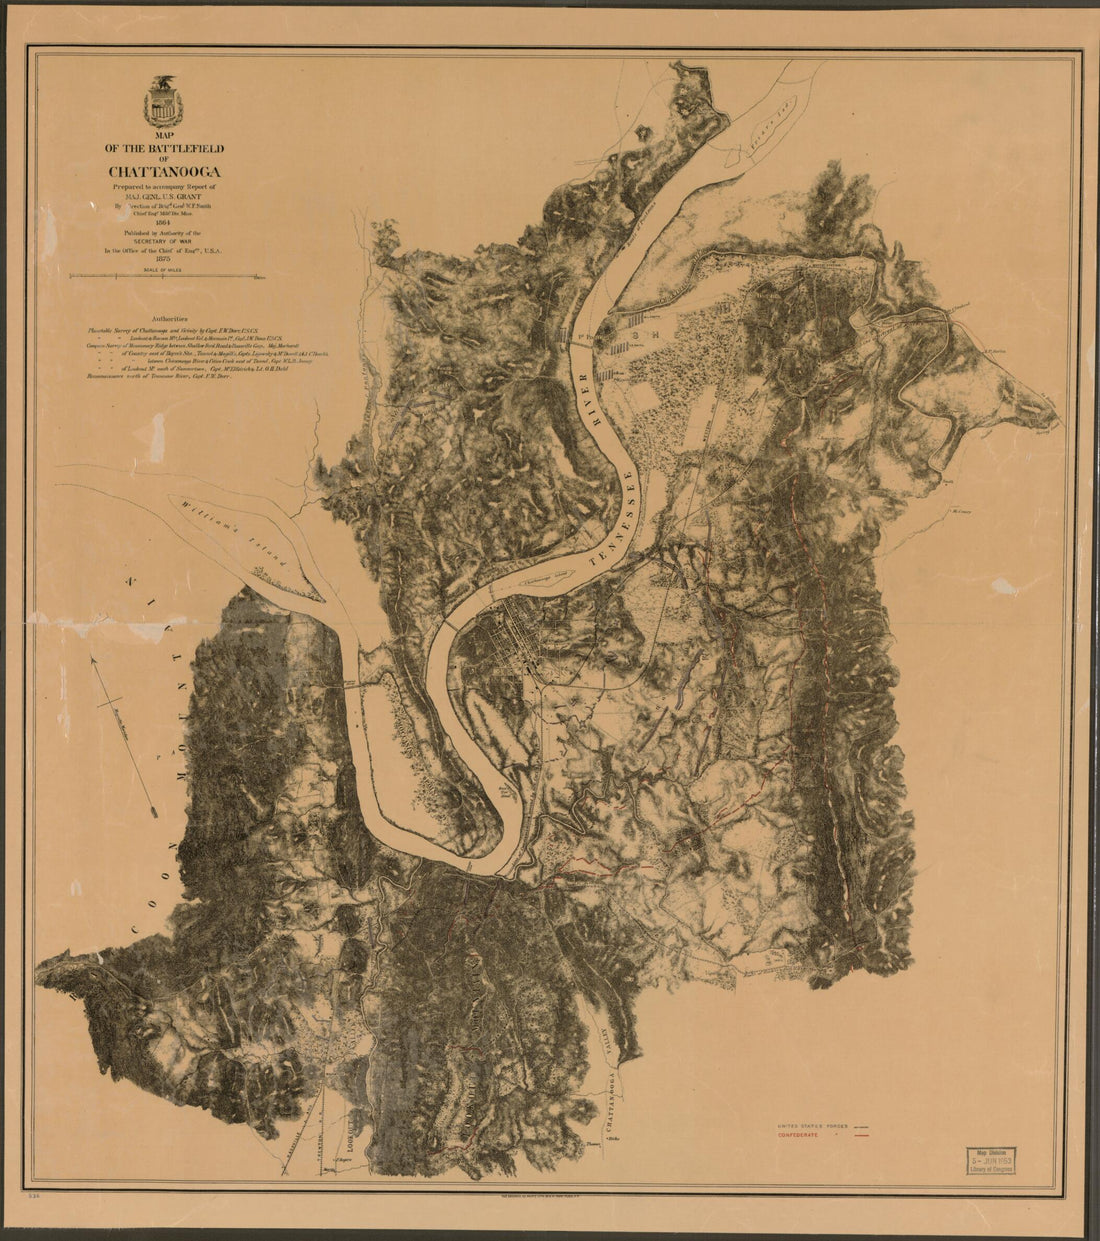 This old map of Map of the Battlefield of Chattanooga from 1875 was created by William F. Smith in 1875